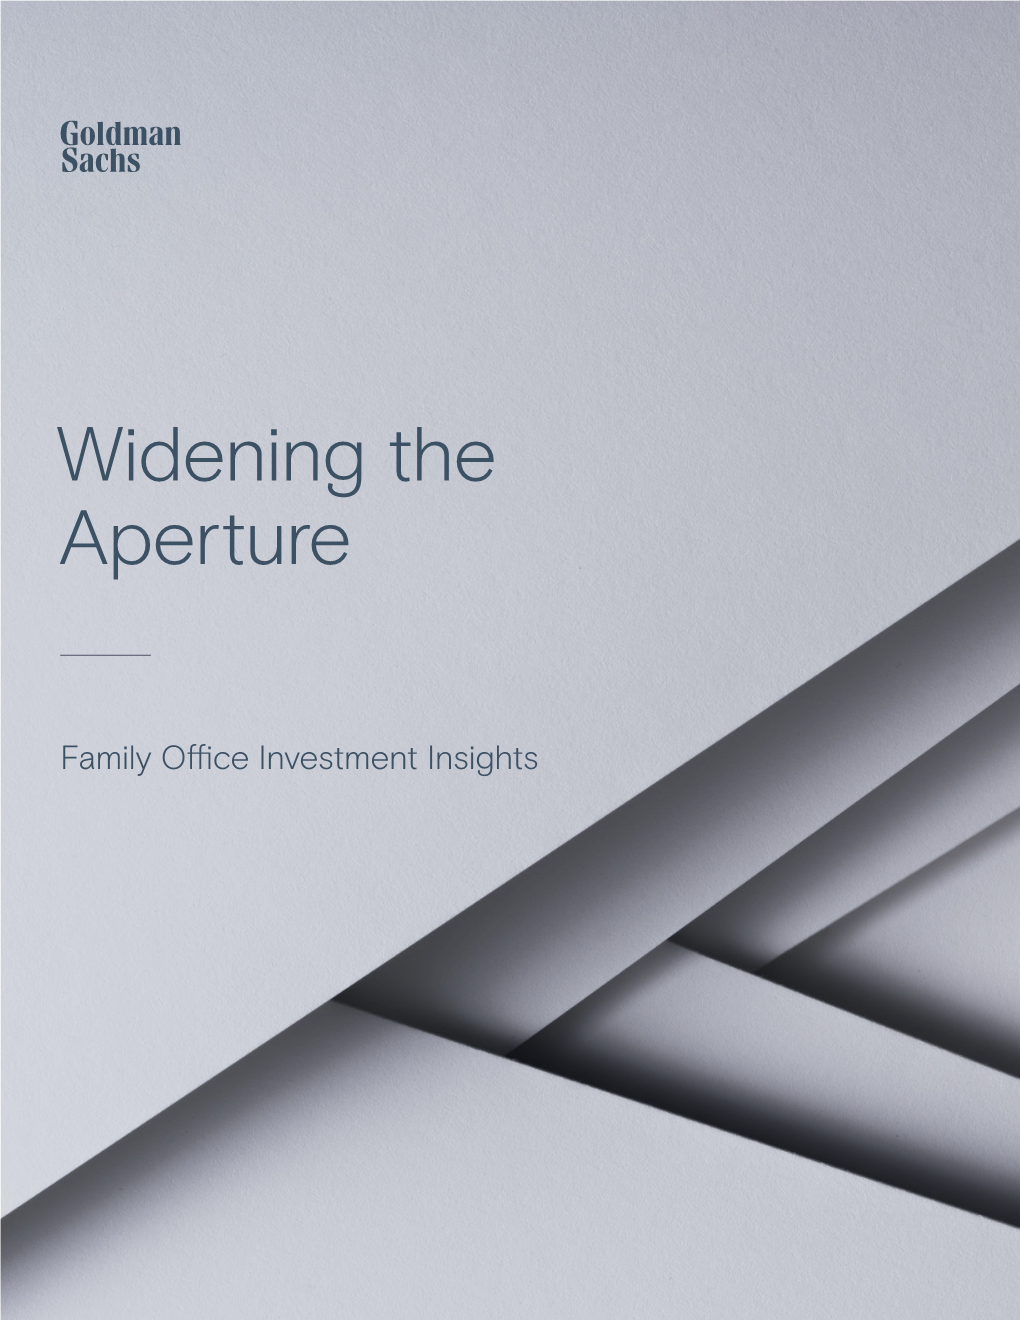 Widening the Aperture: Family Office Investment Insights